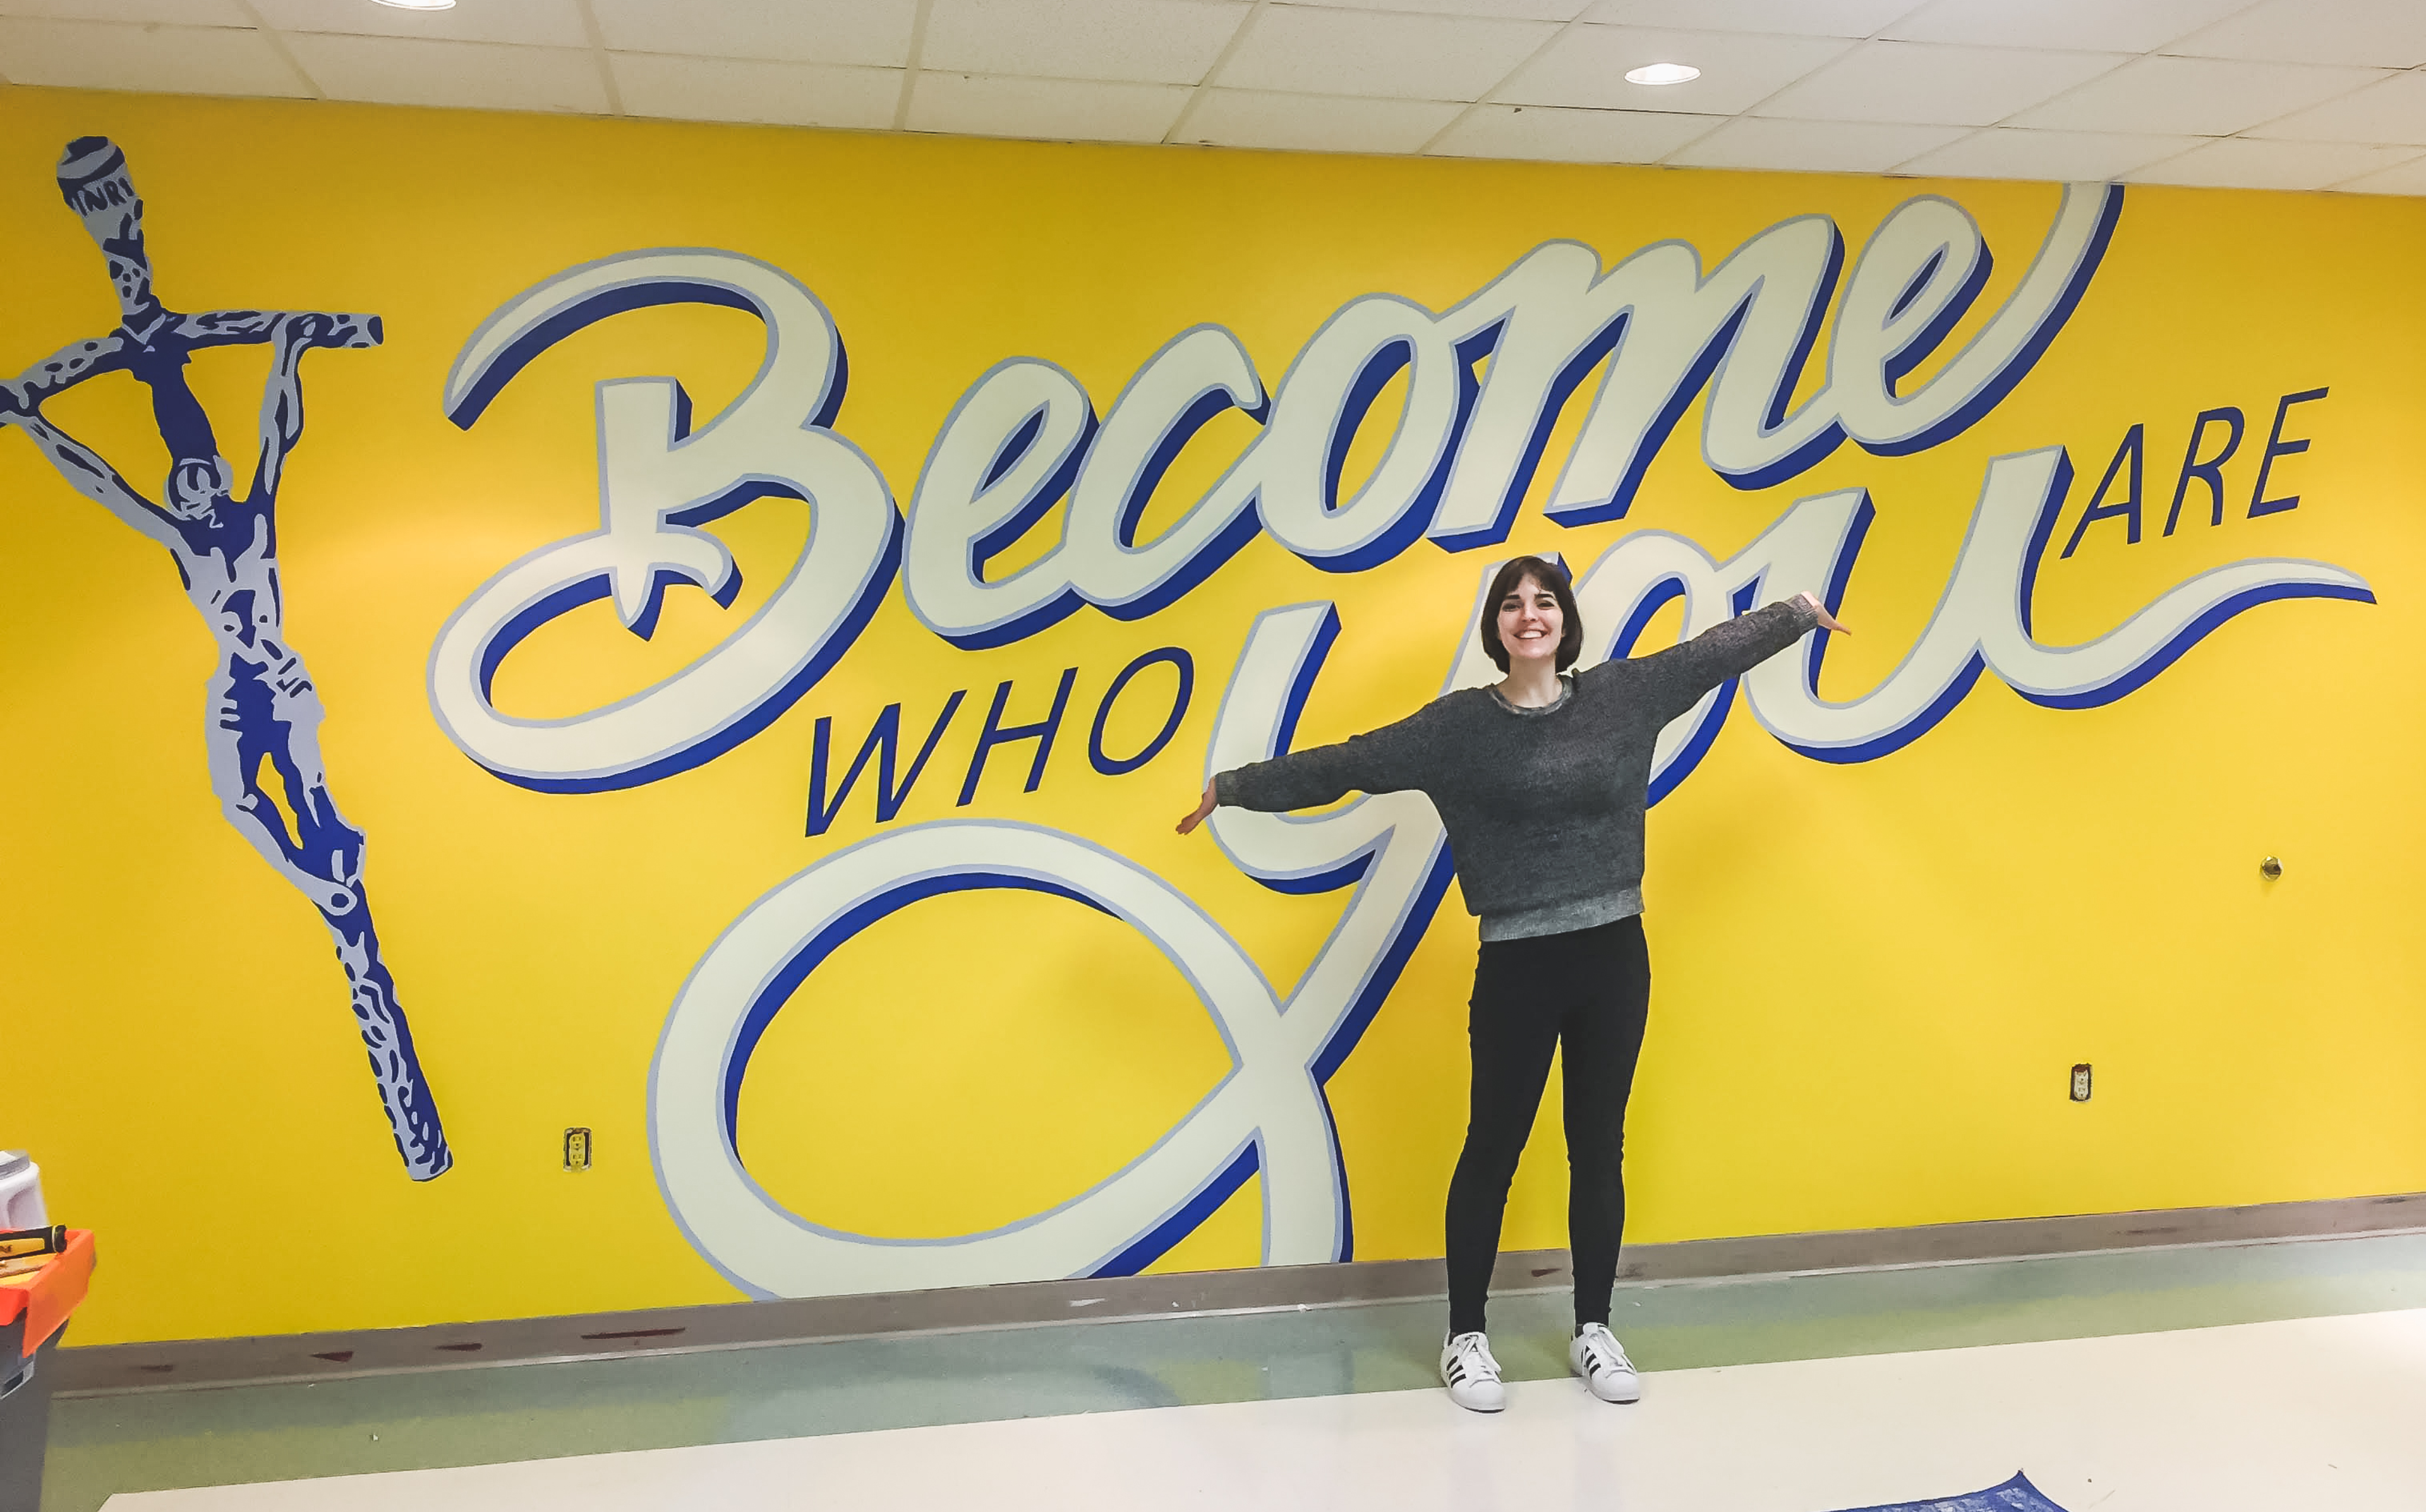 Become Who You Are mural